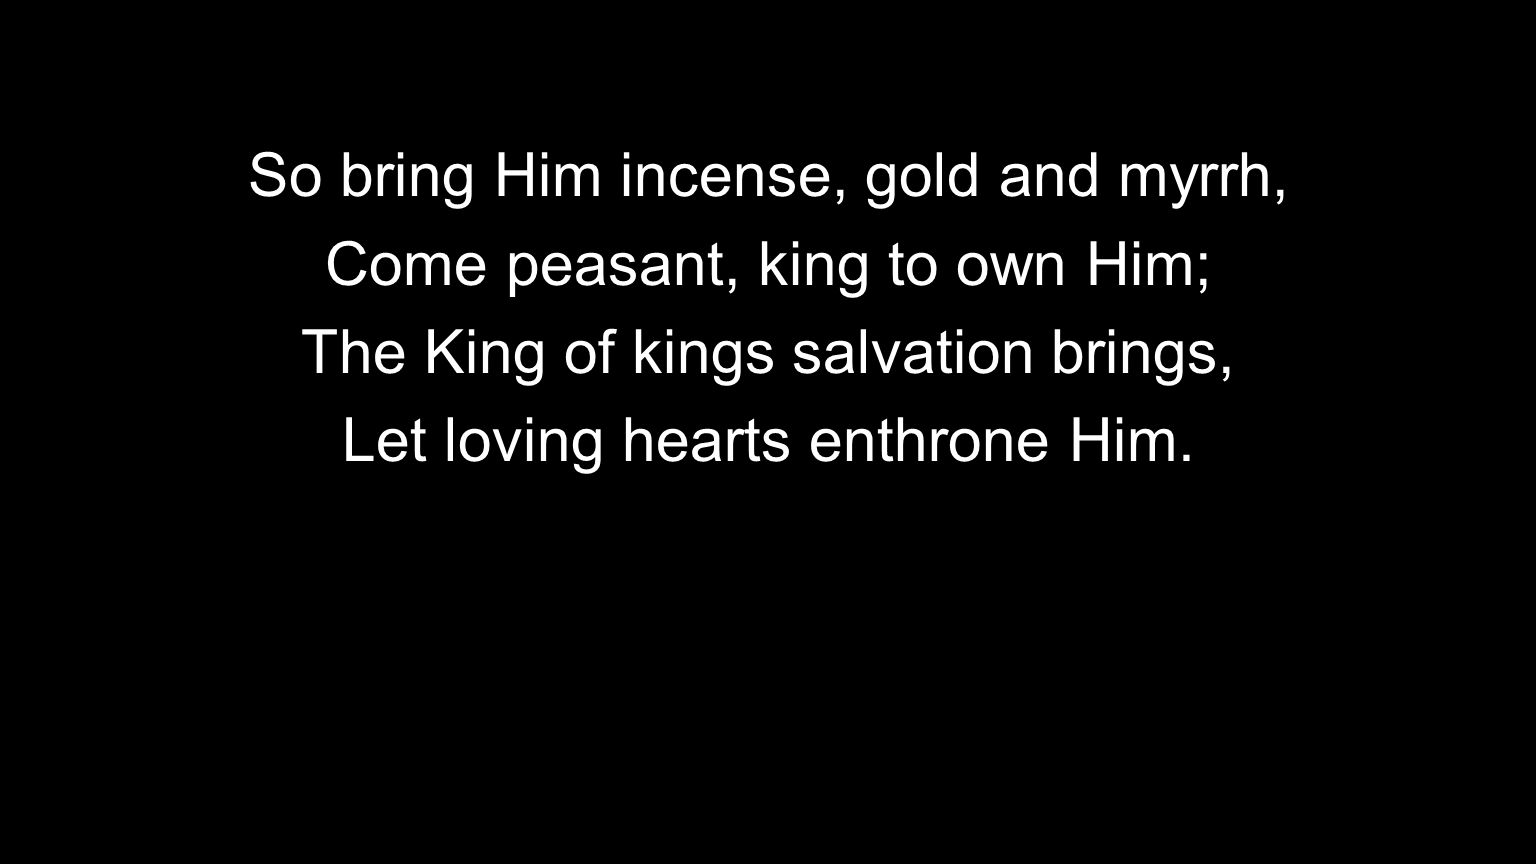 So bring Him incense, gold and myrrh, Come peasant, king to own Him; The King of kings salvation brings, Let loving hearts enthrone Him.